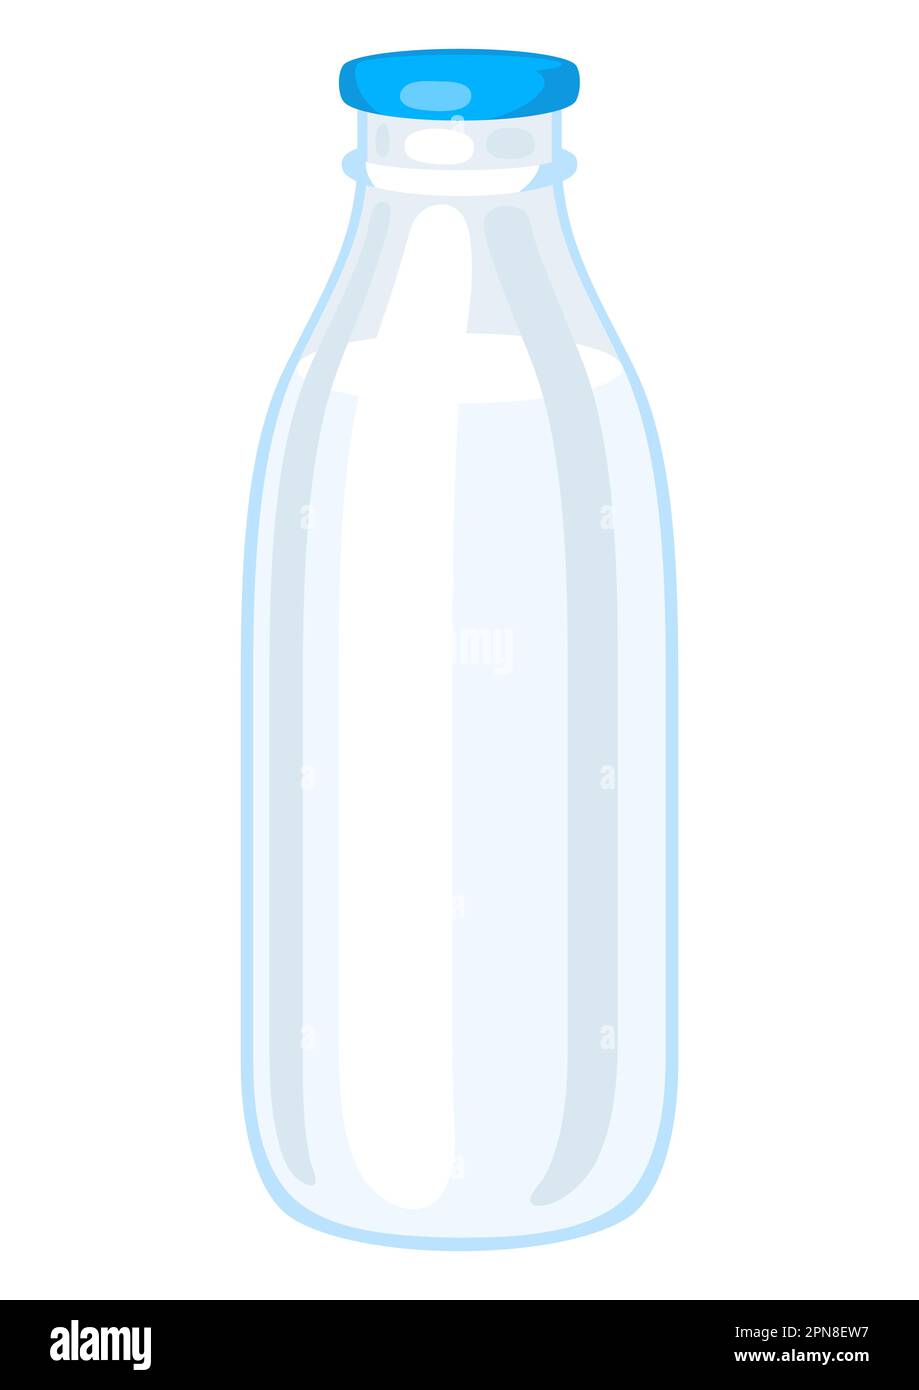 Glass bottle with milk. Illustration of dairy product for advertising and sale in store. Stock Vector